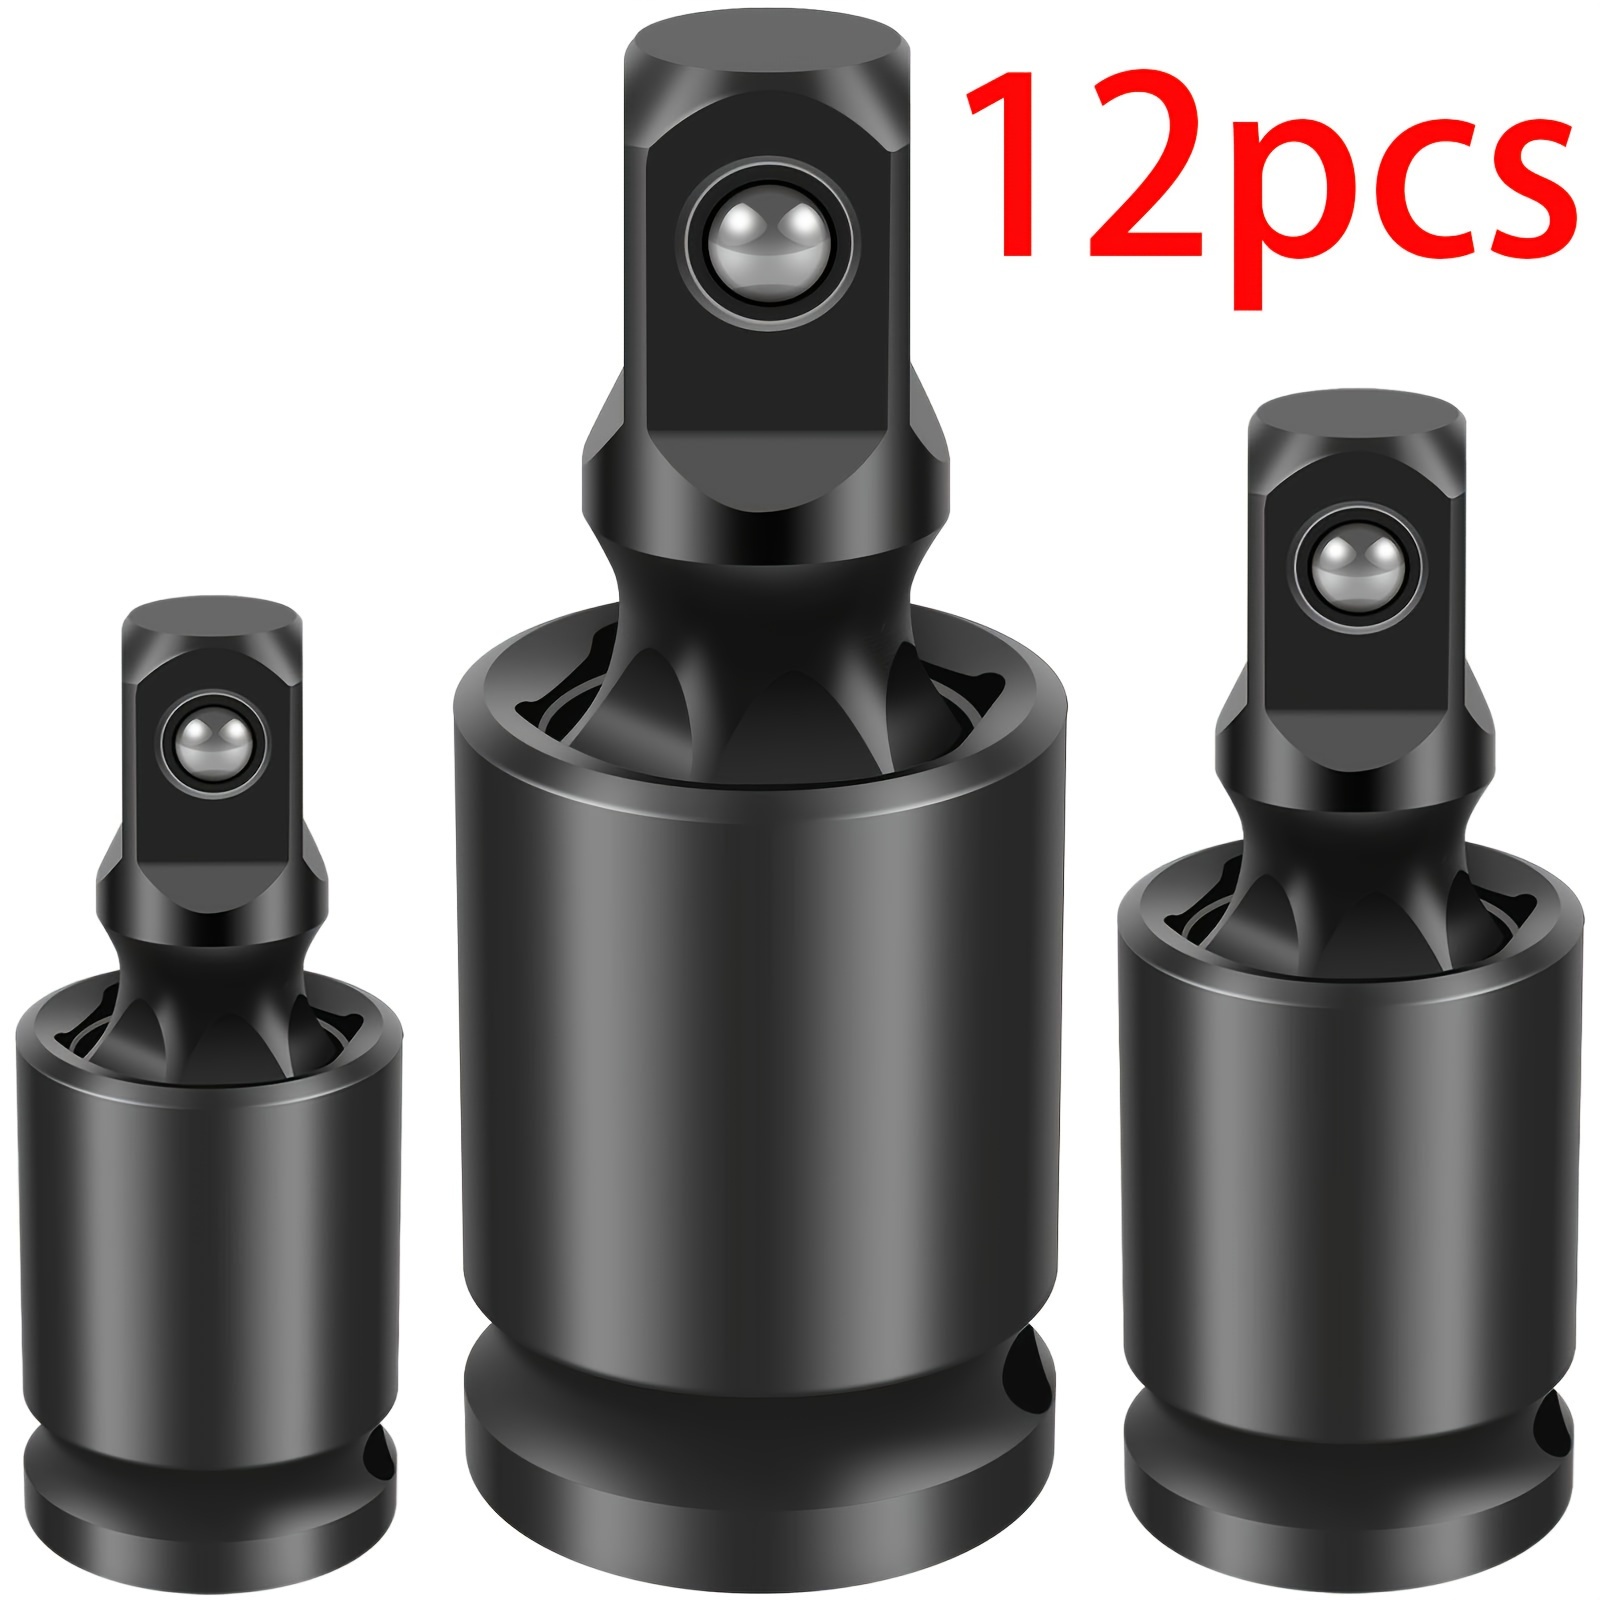 

3pcs Impact Universal Joint Swivel Socket Set Professional Swivel Socket Adapter 3/8inch 1/2inch 1/4inch 360° Rotatable Joint Socket Adapter Cr-mo For Electric Wrench Ratchet Wrench